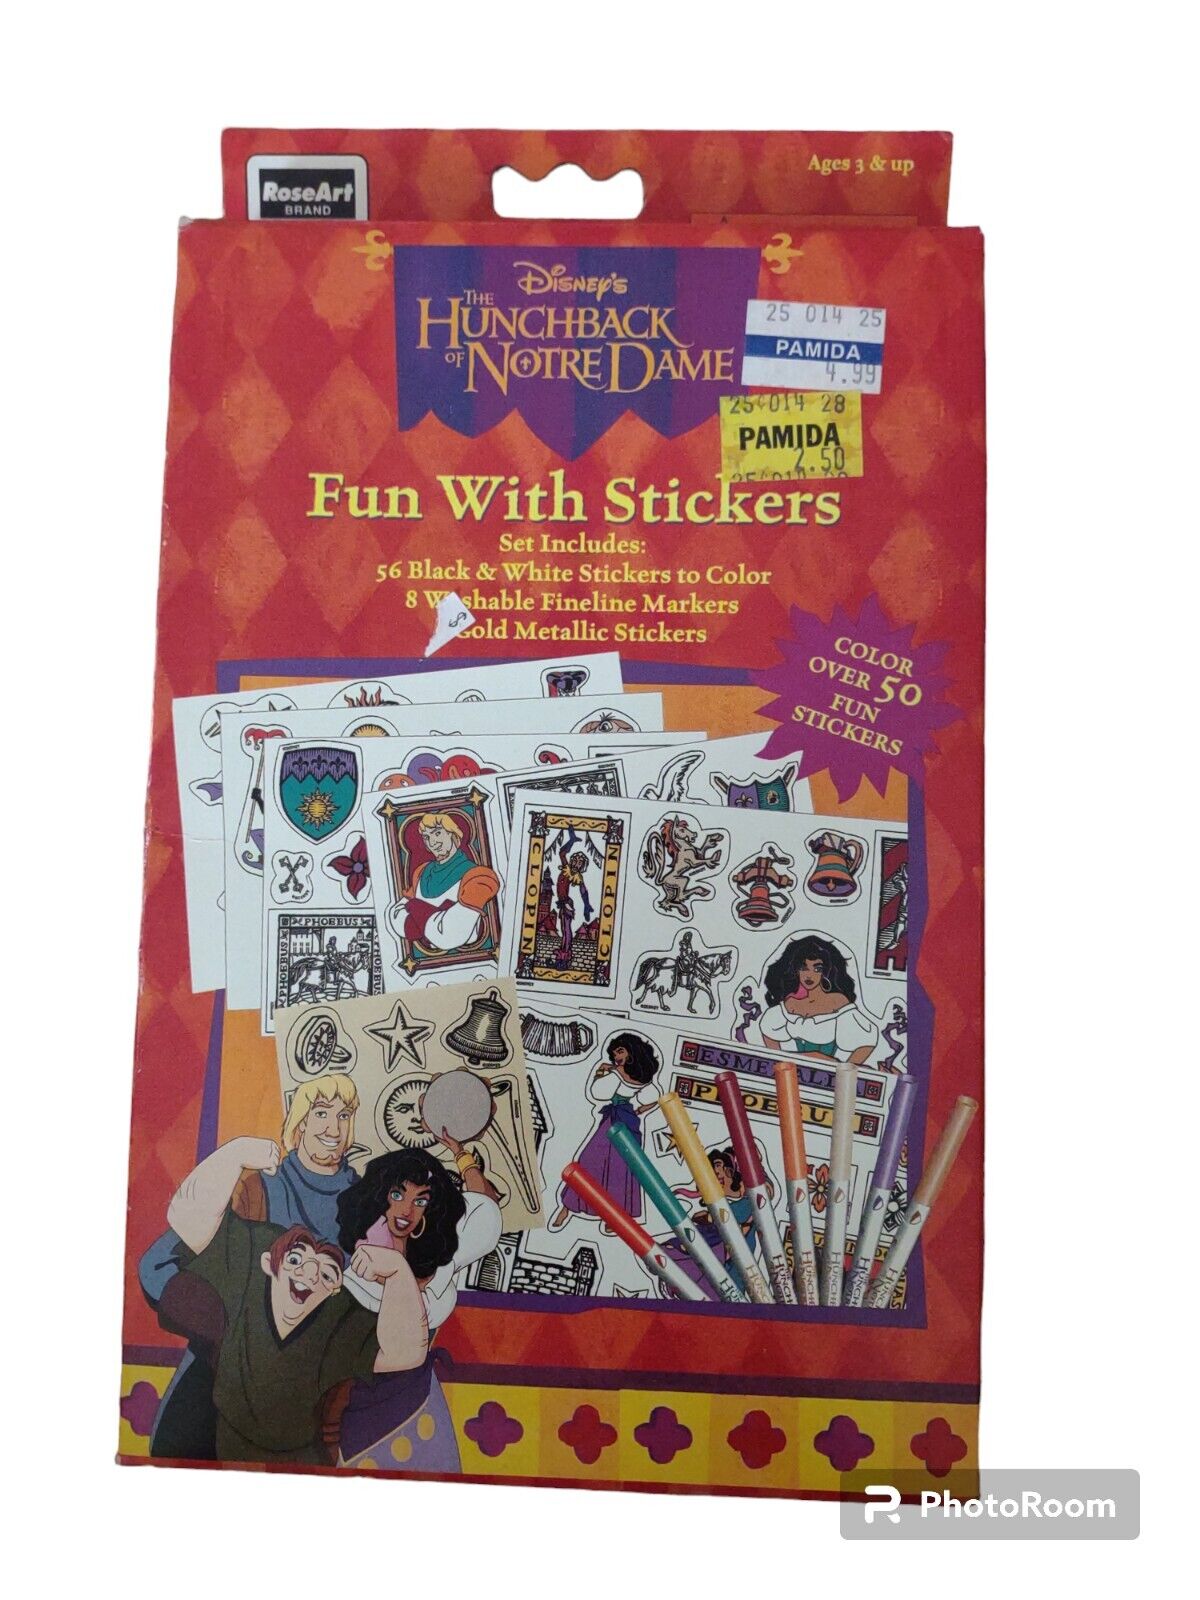 RoseArt Disney's The Hunchback Of Notre Dame Fun With Stickers